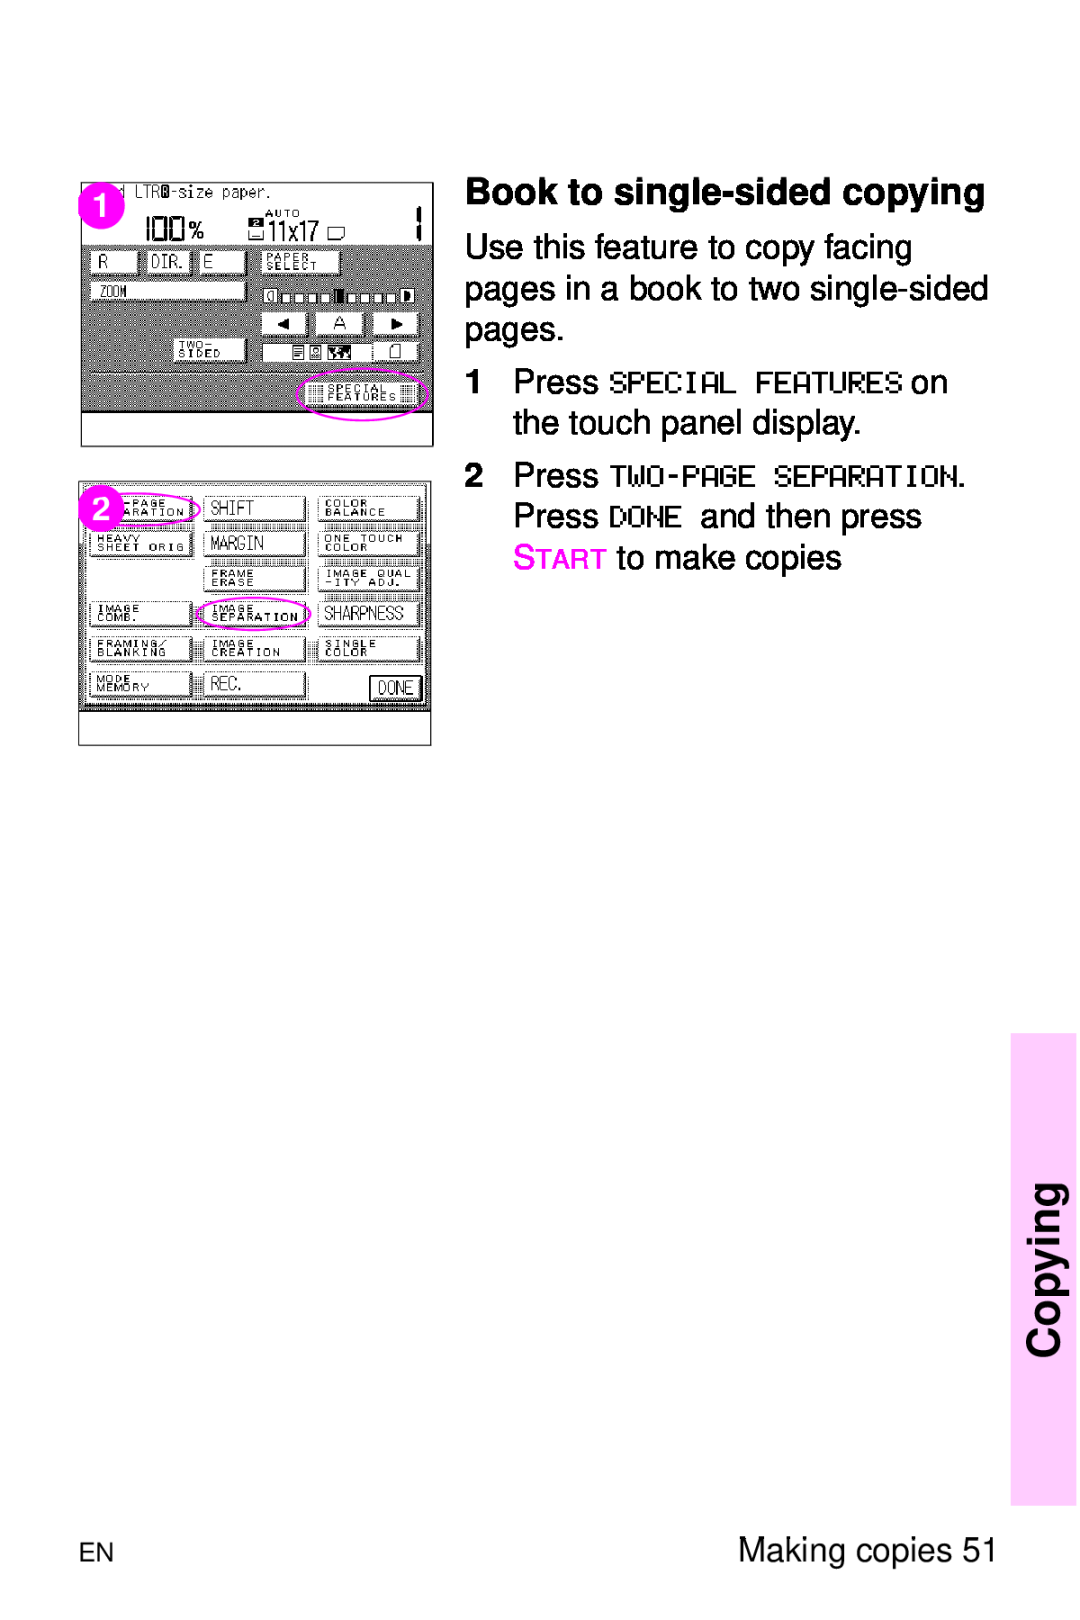 HP 8000 s manual Book to single-sided copying, Copying 